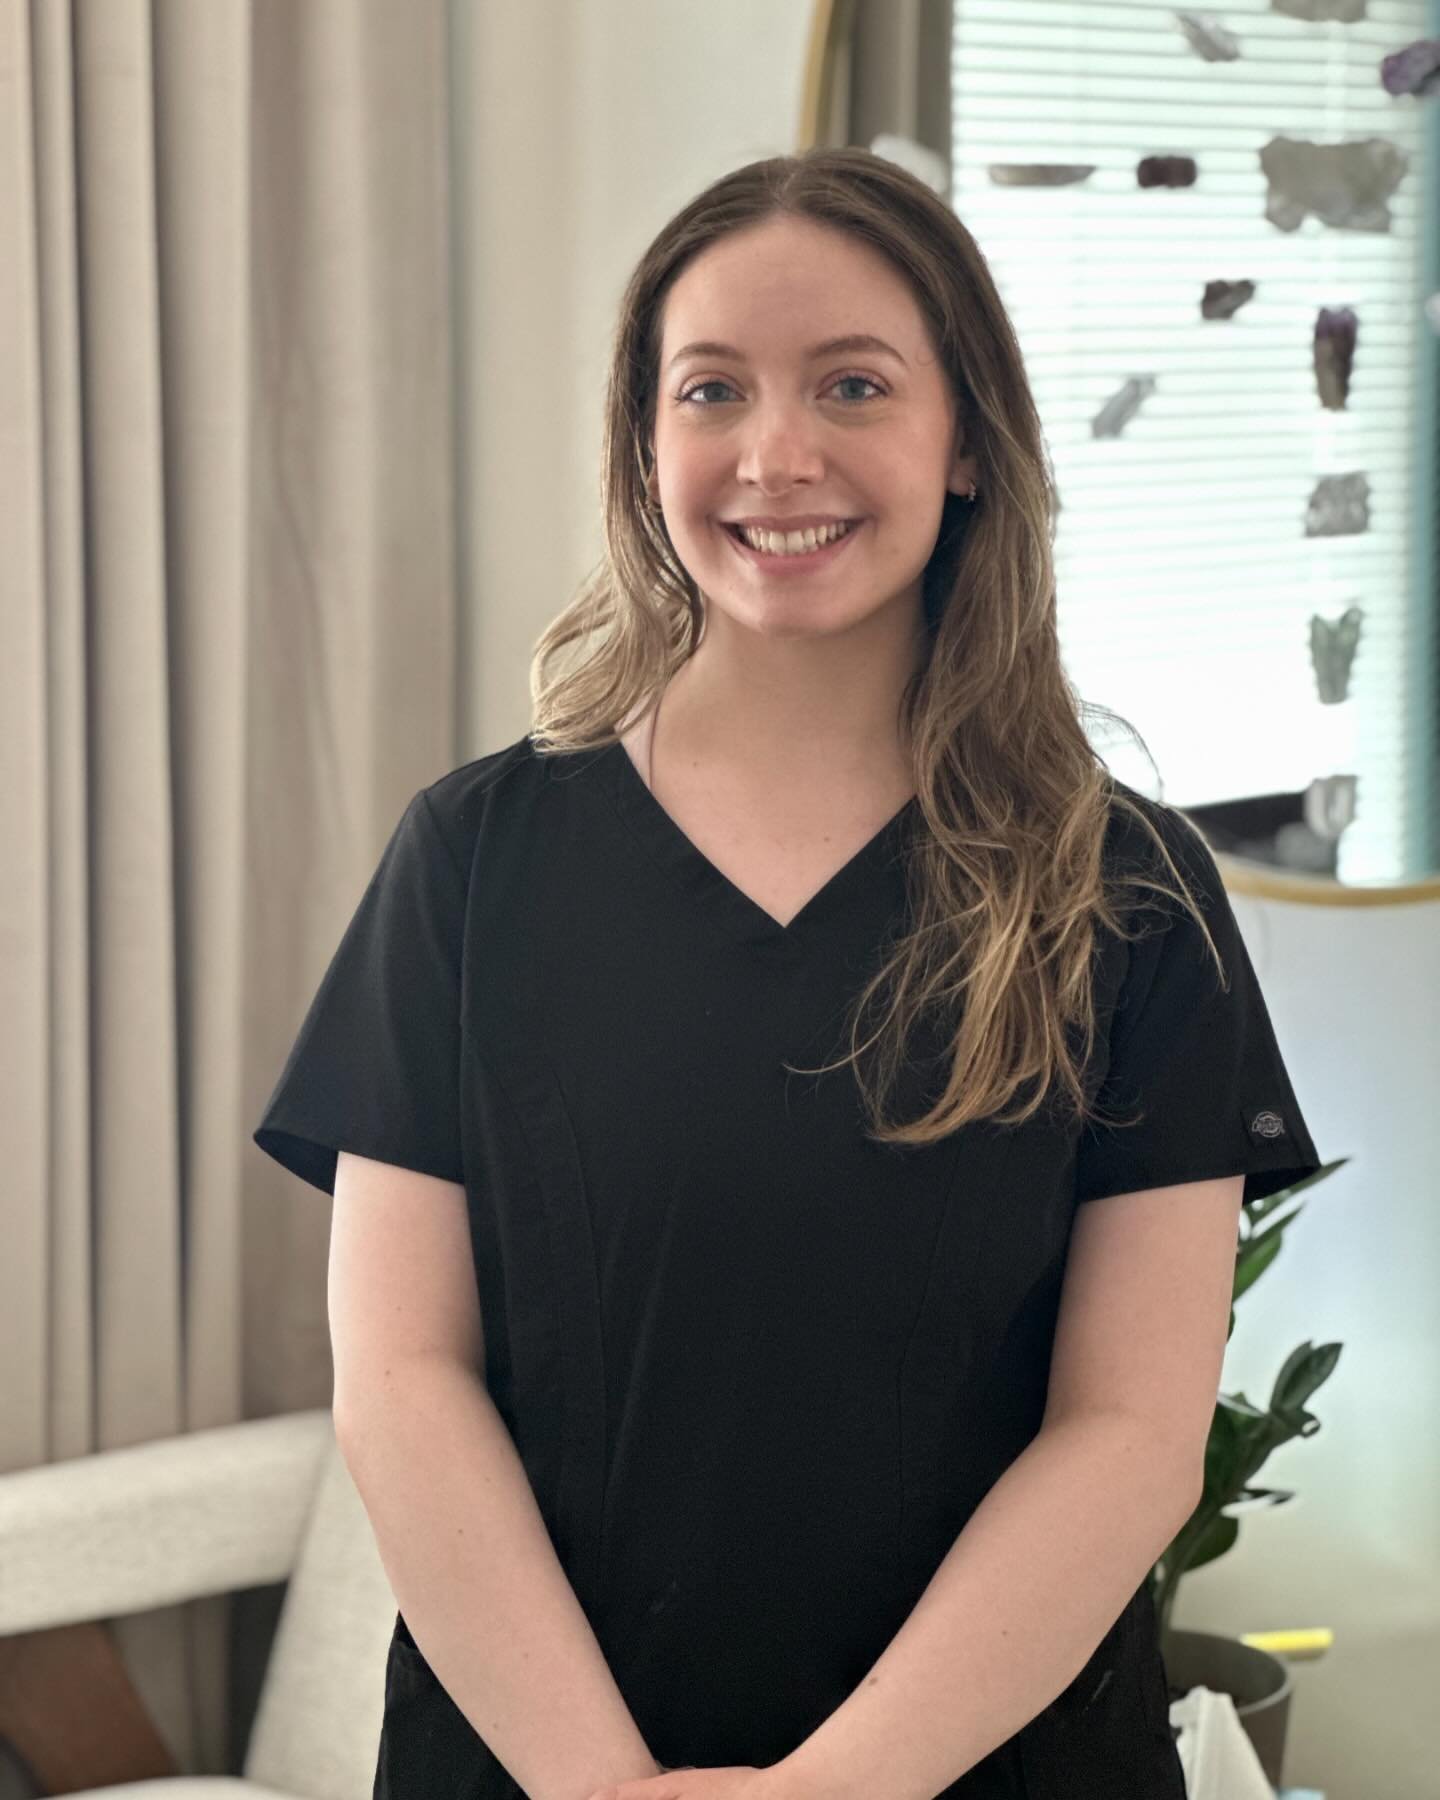 We have another new massage therapist! Meet Emily! Emily is a graduate from Harper university. Emily is opening for booking and trained in all modalities Harmony Falls offers! Book your next massage with Emily today!